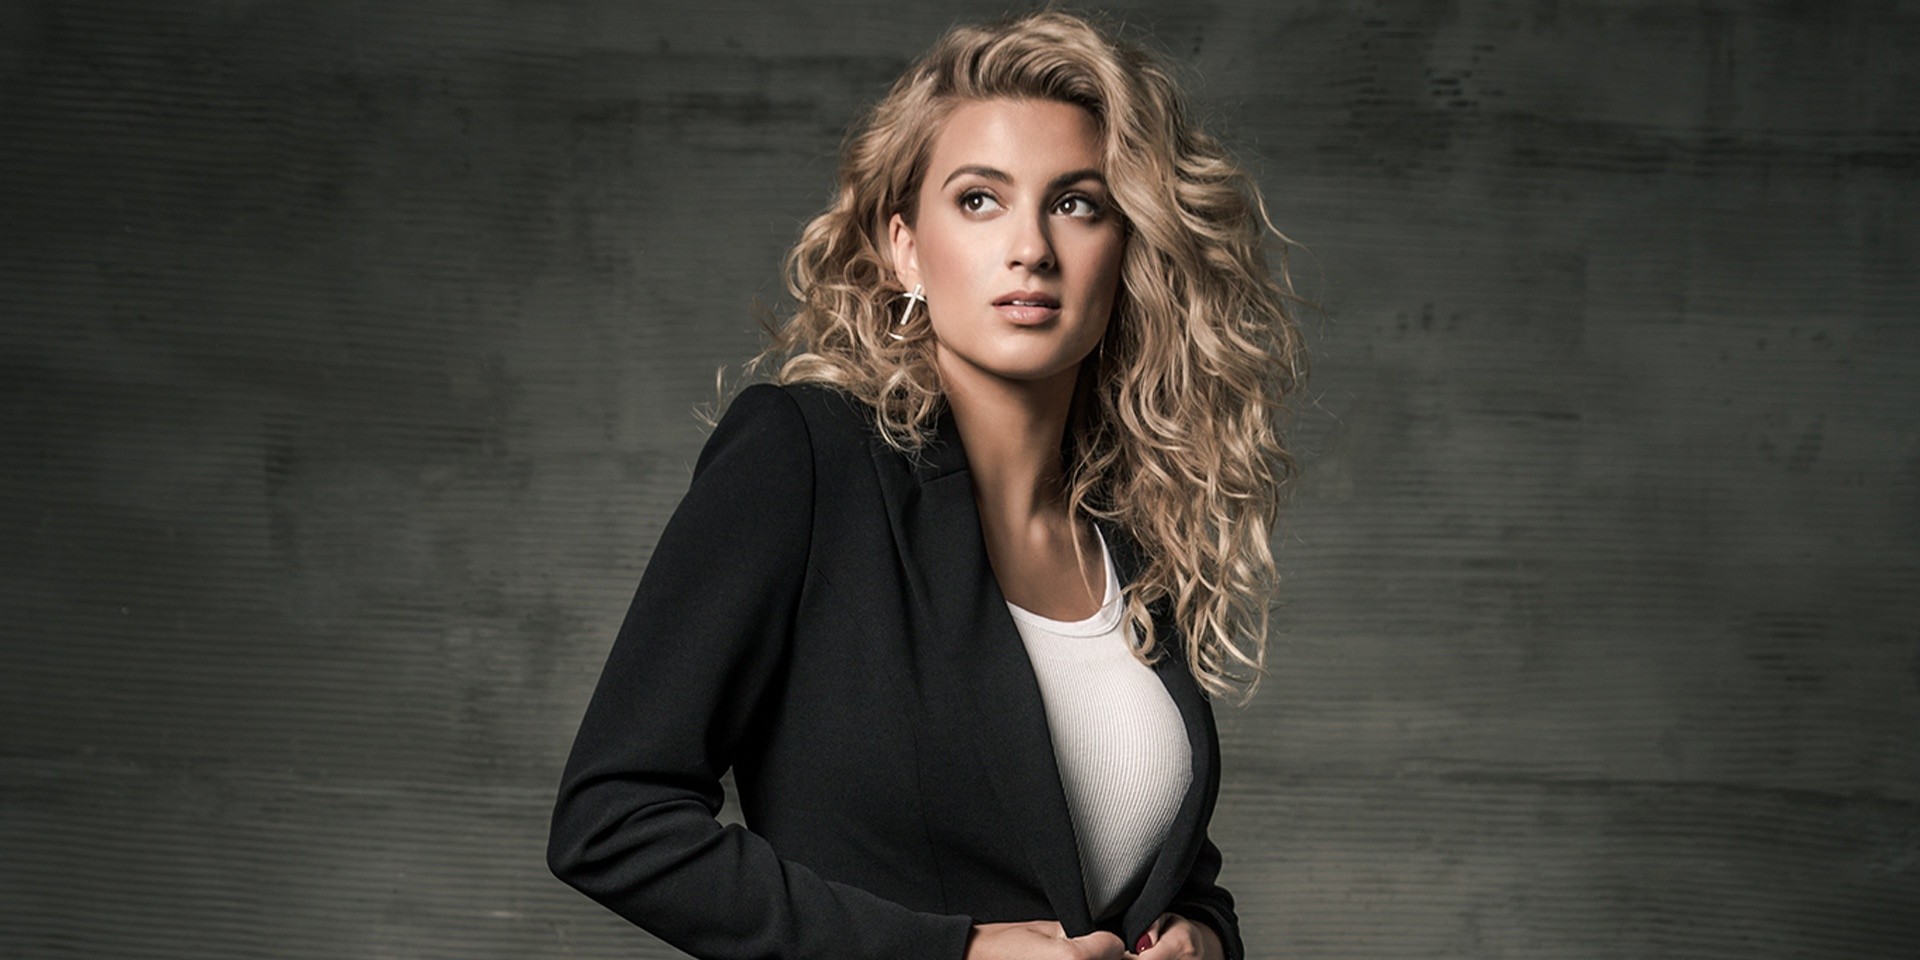 Tori Kelly is coming to Asia in 2020 – Manila, Seoul, Tokyo confirmed